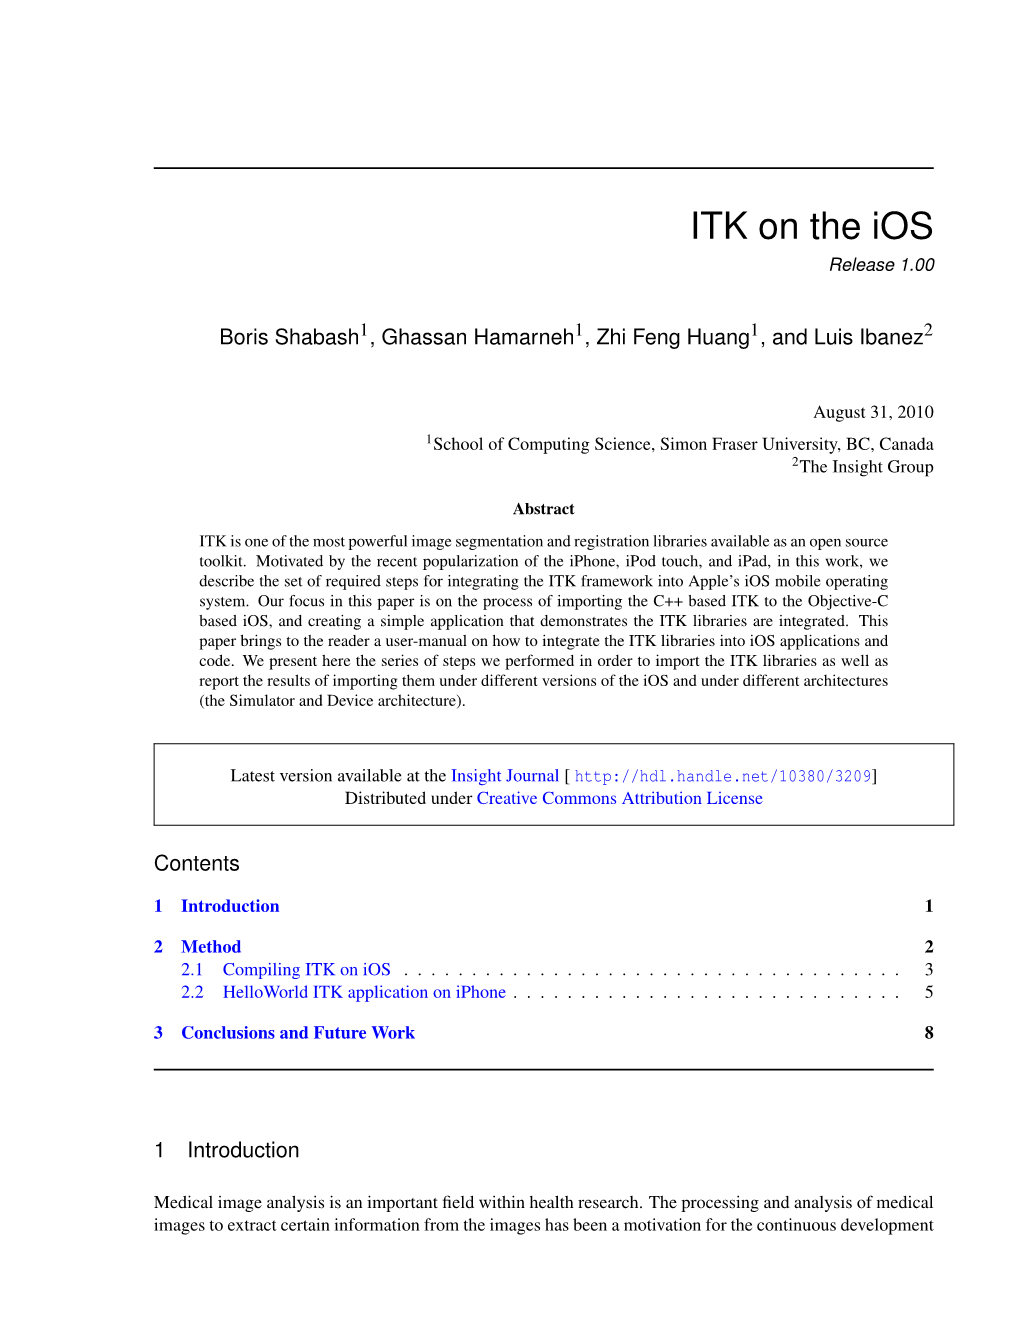 ITK on the Ios Release 1.00